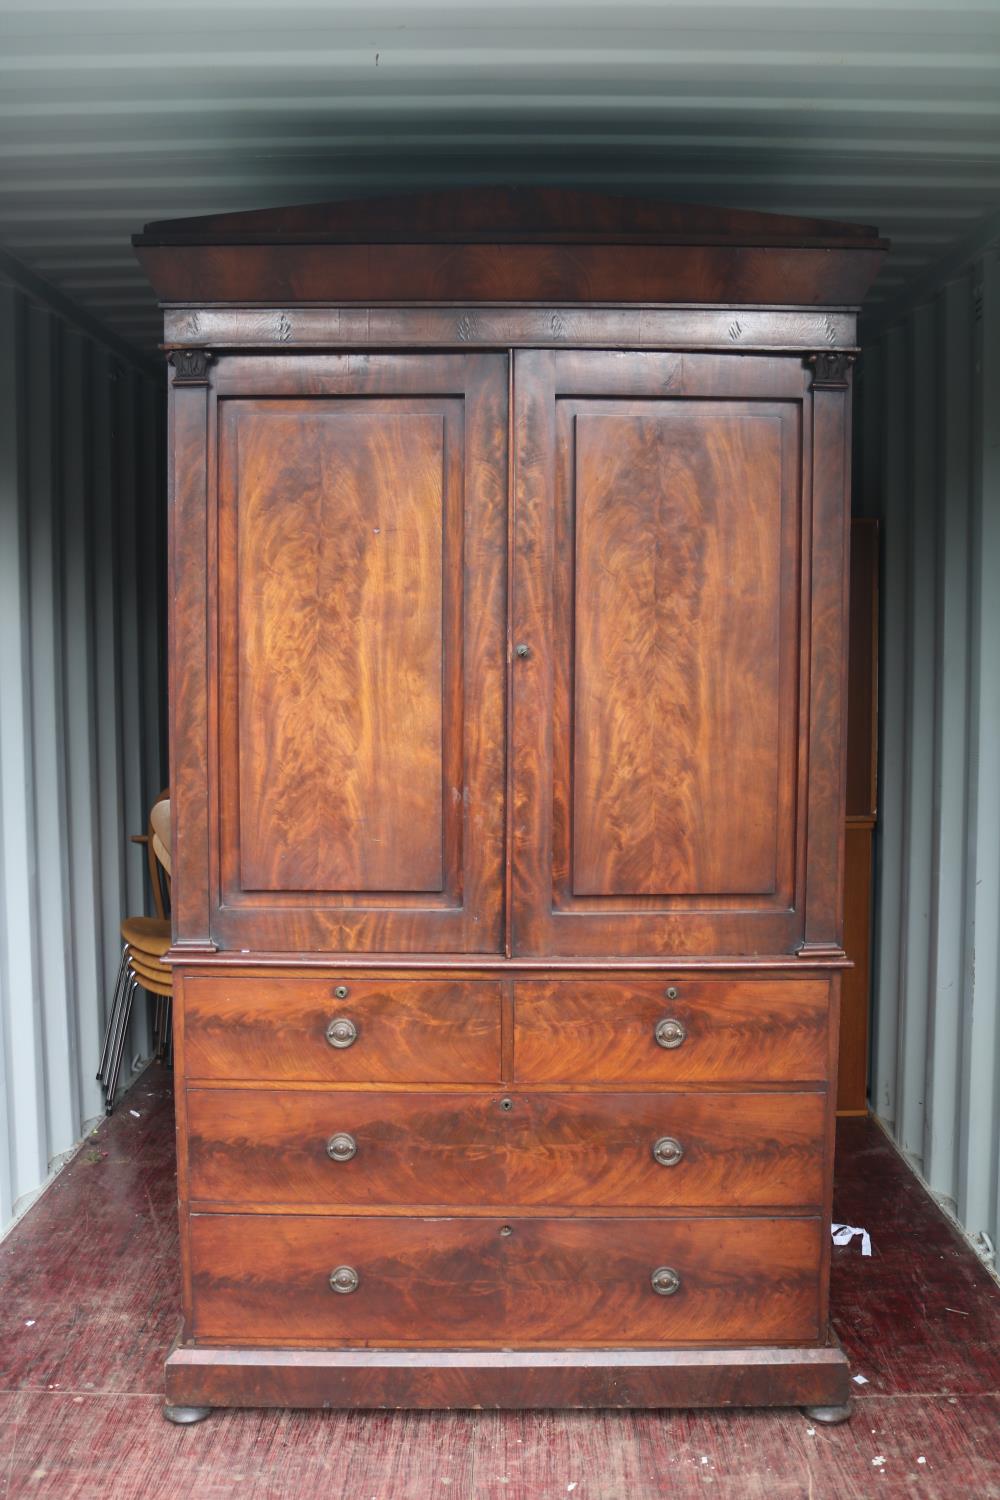 William IV Flame Mahogany fronted Linen press with panelled doors over 4 drawers with brass - Image 2 of 3